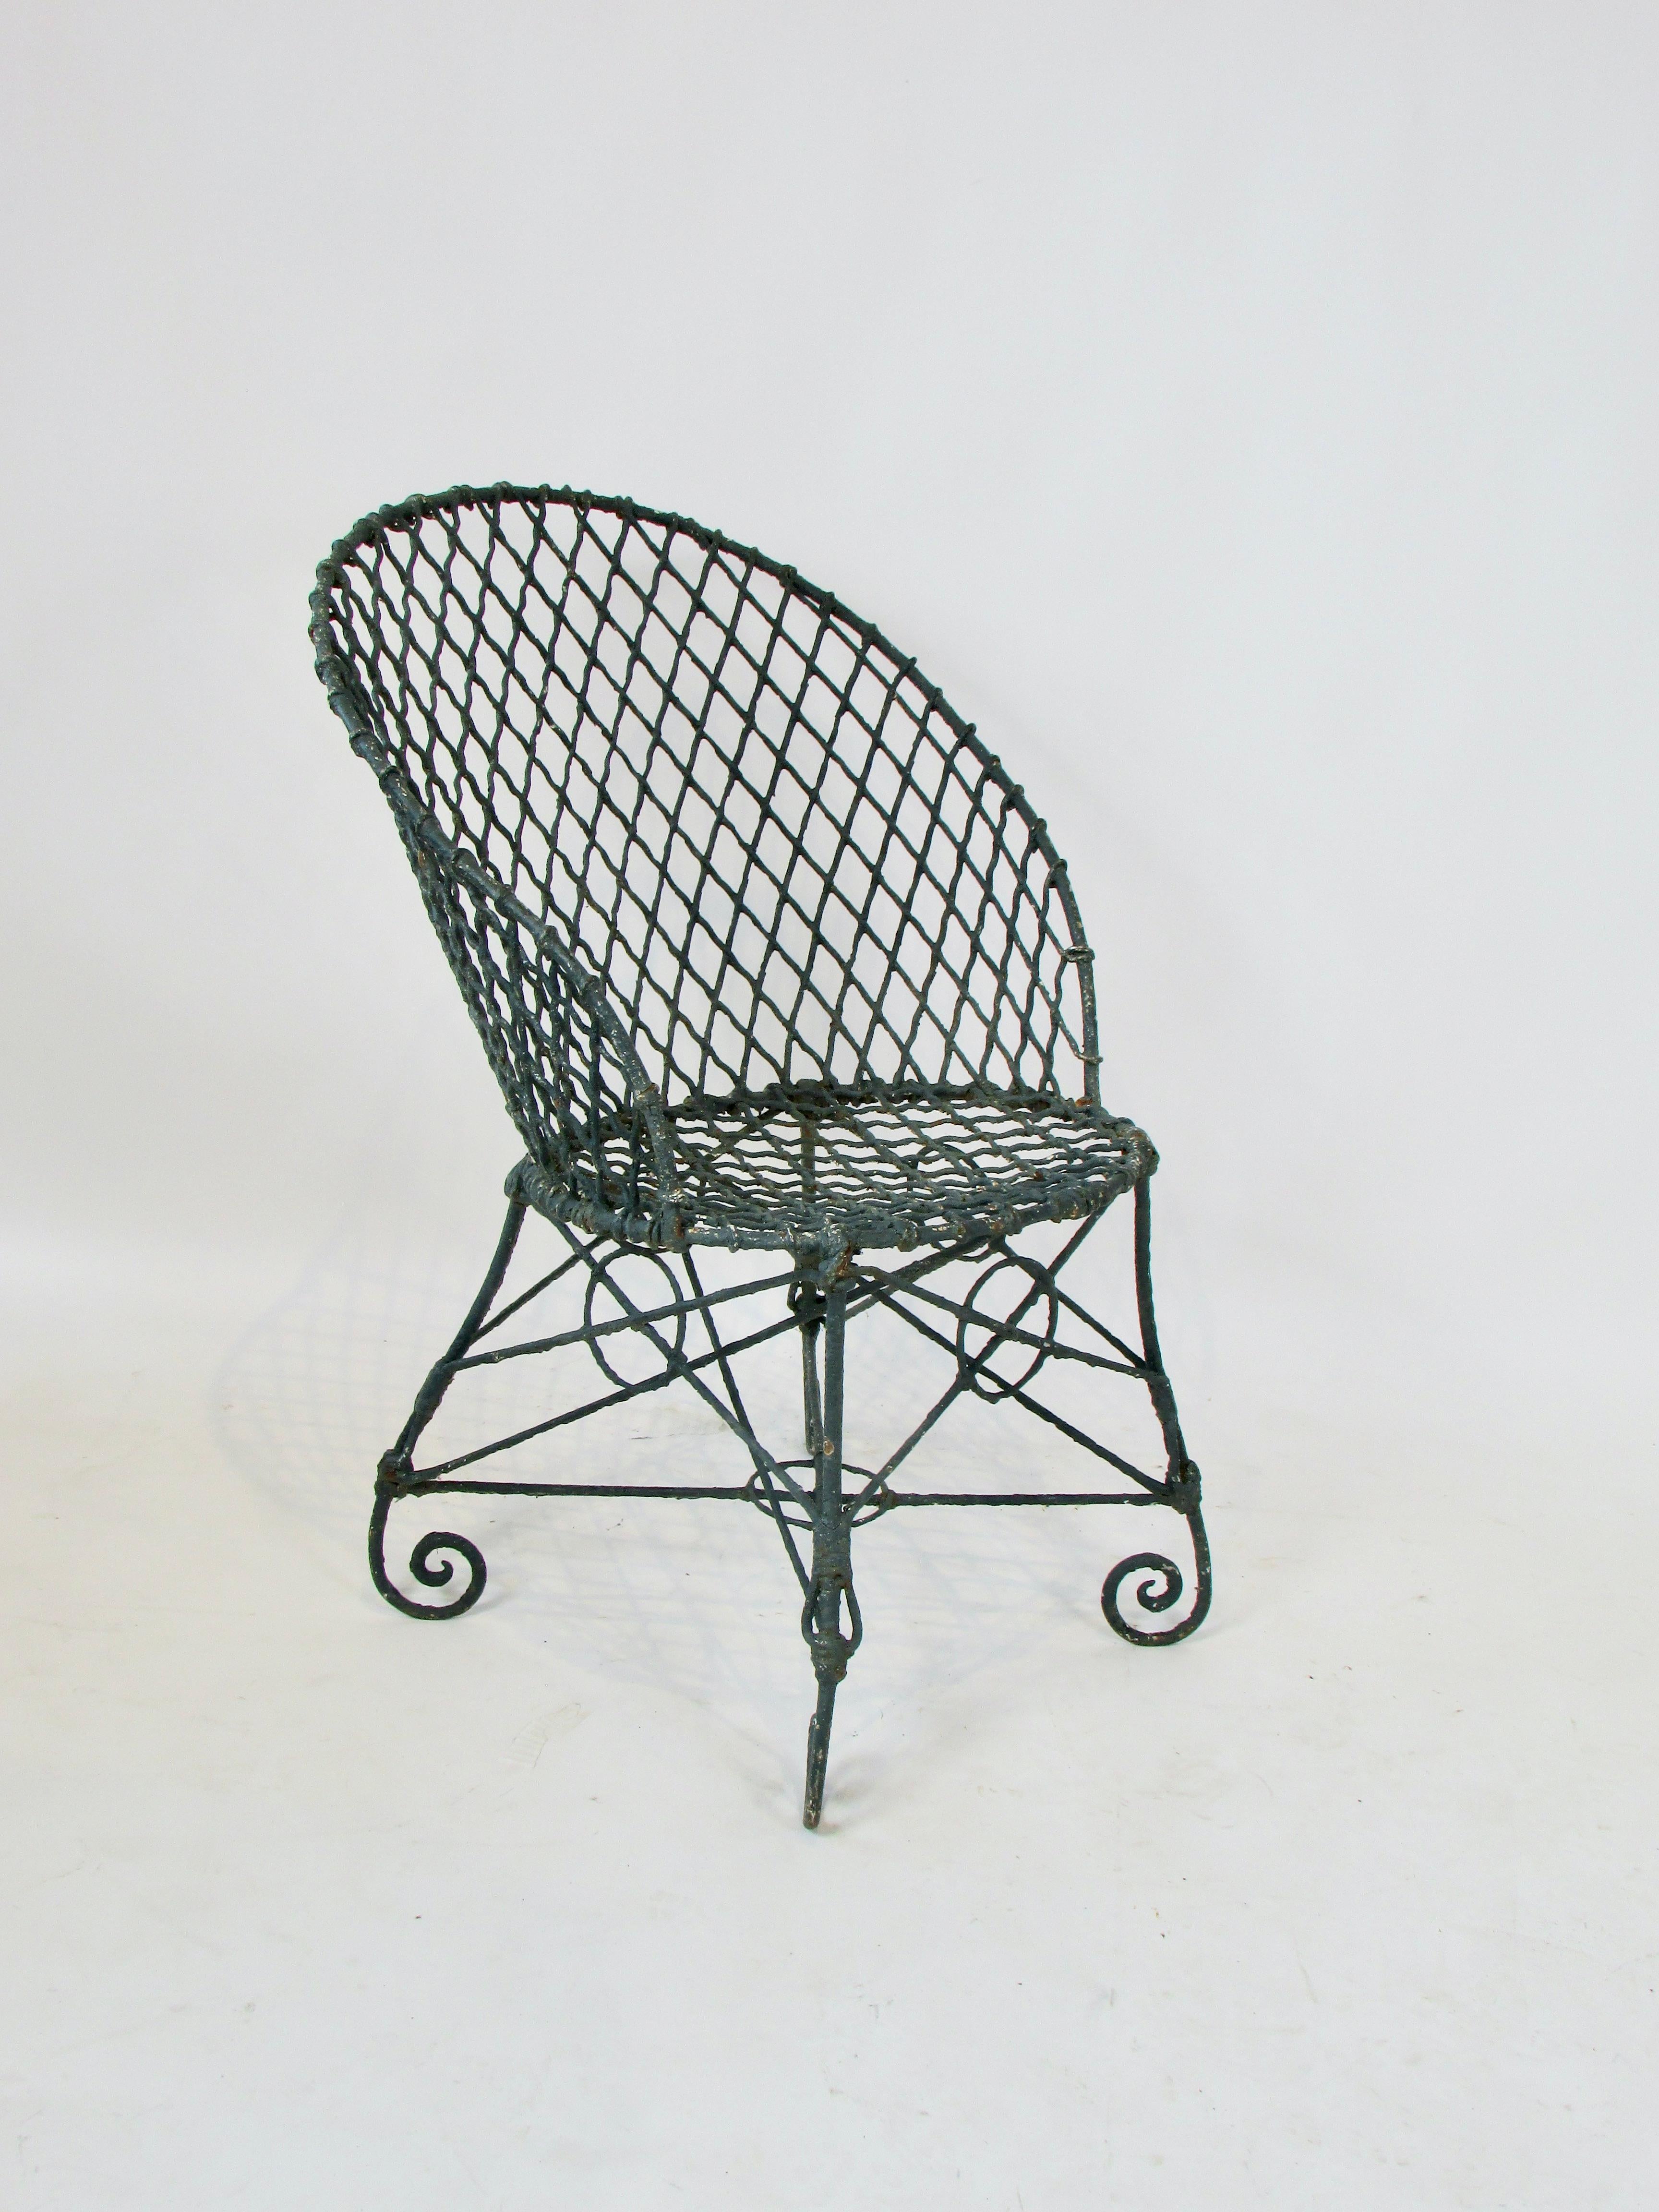 Hand-Painted Early 20th Century wire garden chair in old paint and patina